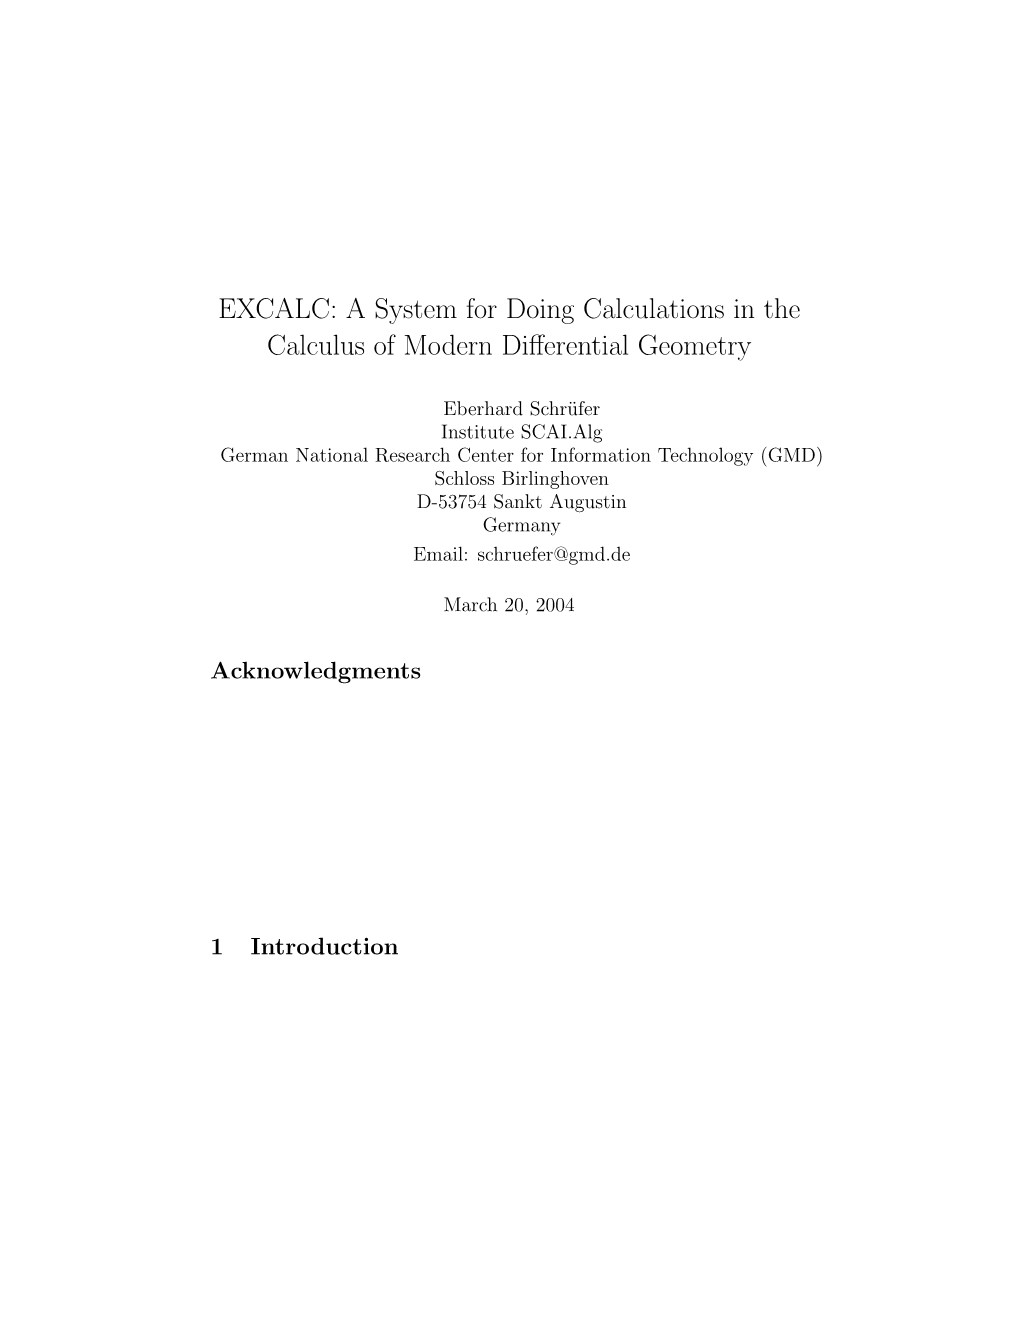 EXCALC: a System for Doing Calculations in the Calculus of Modern Diﬀerential Geometry